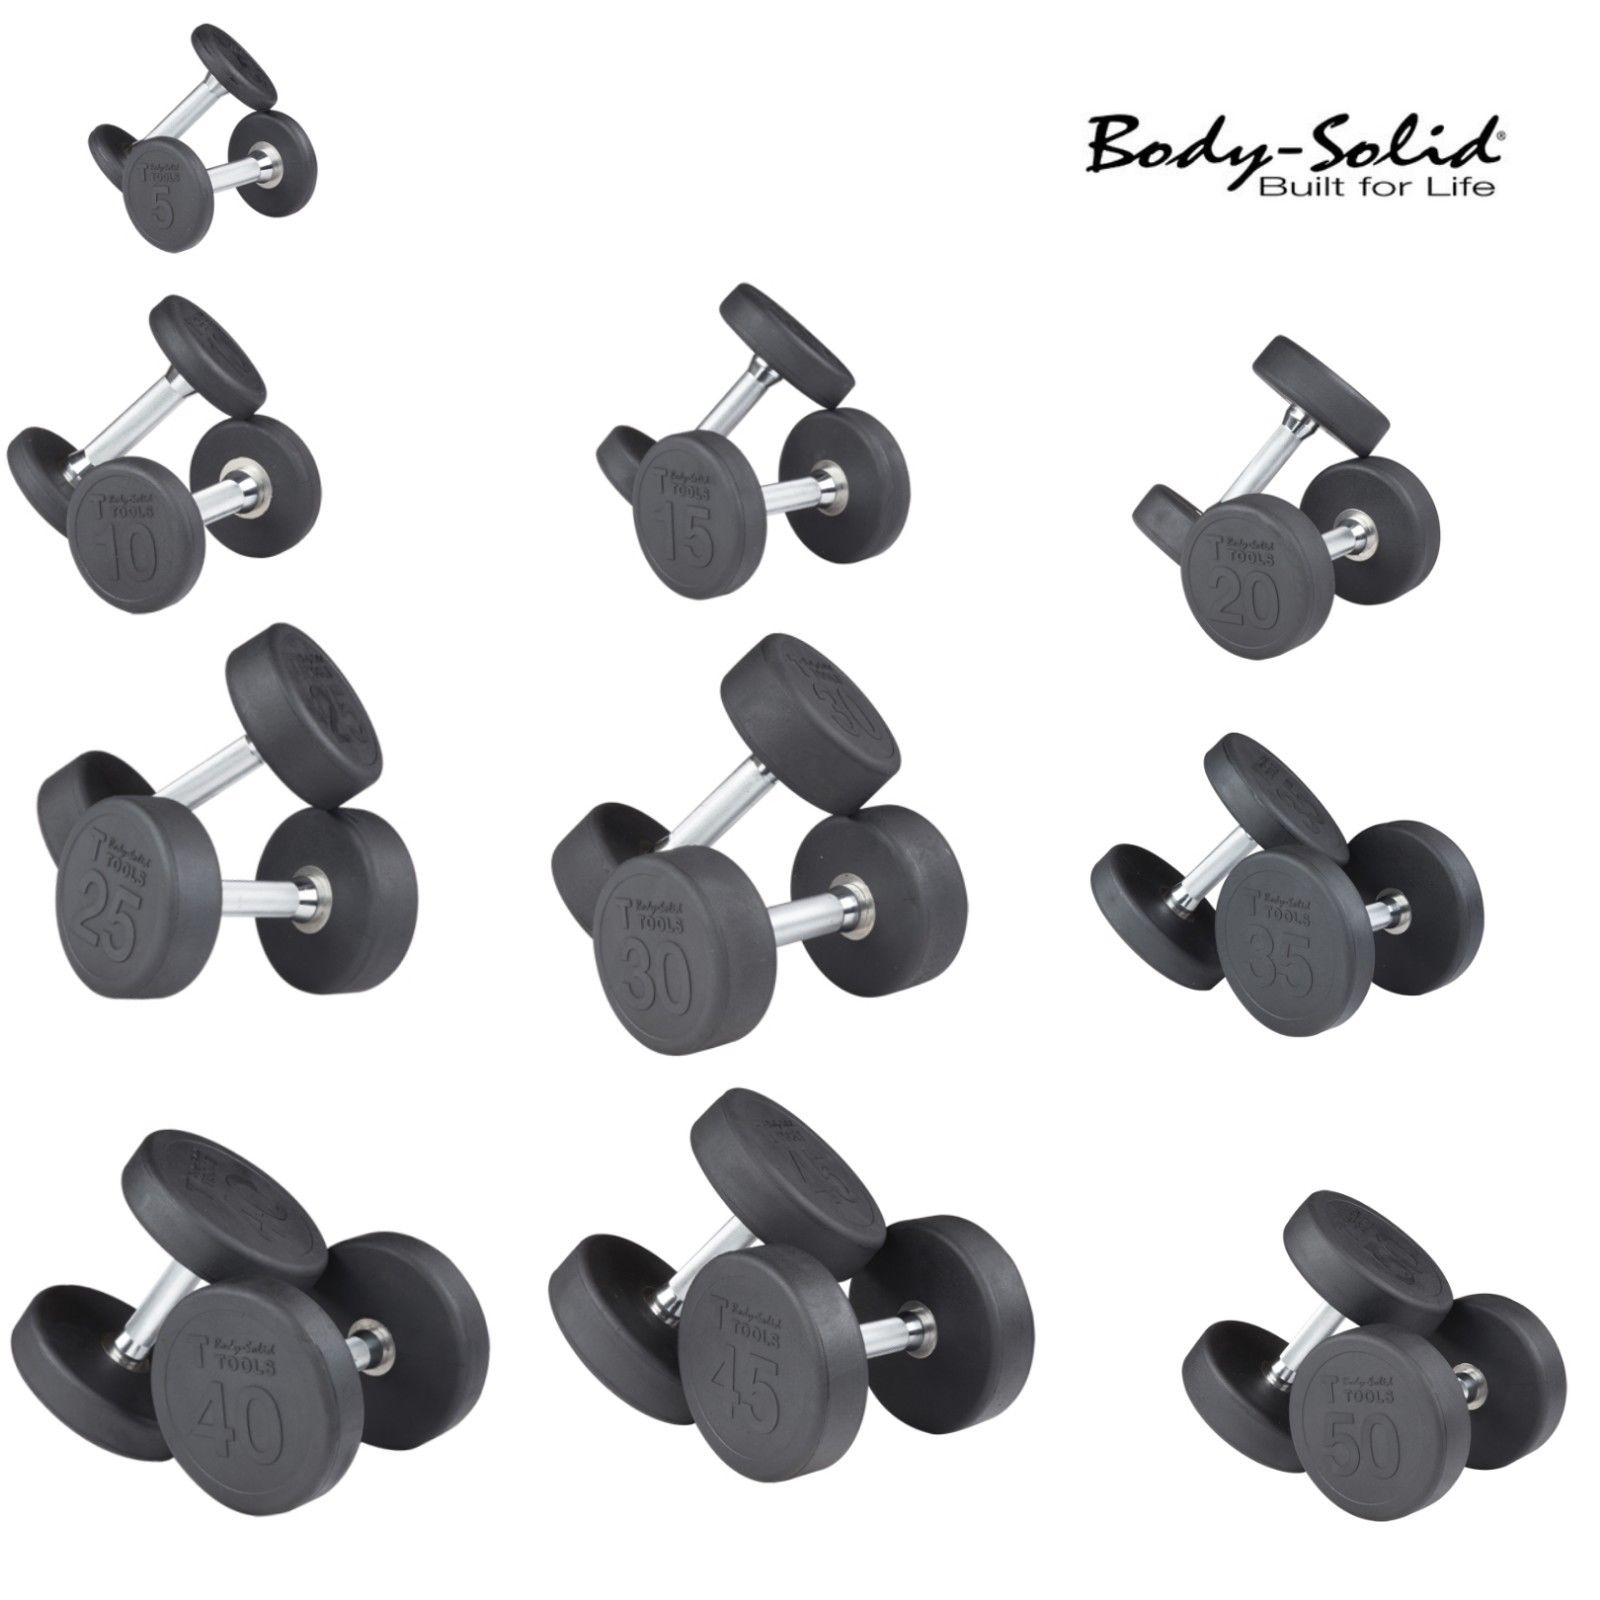 Body-Solid Round Rubber Coated Pro Style Dumbbell SDP